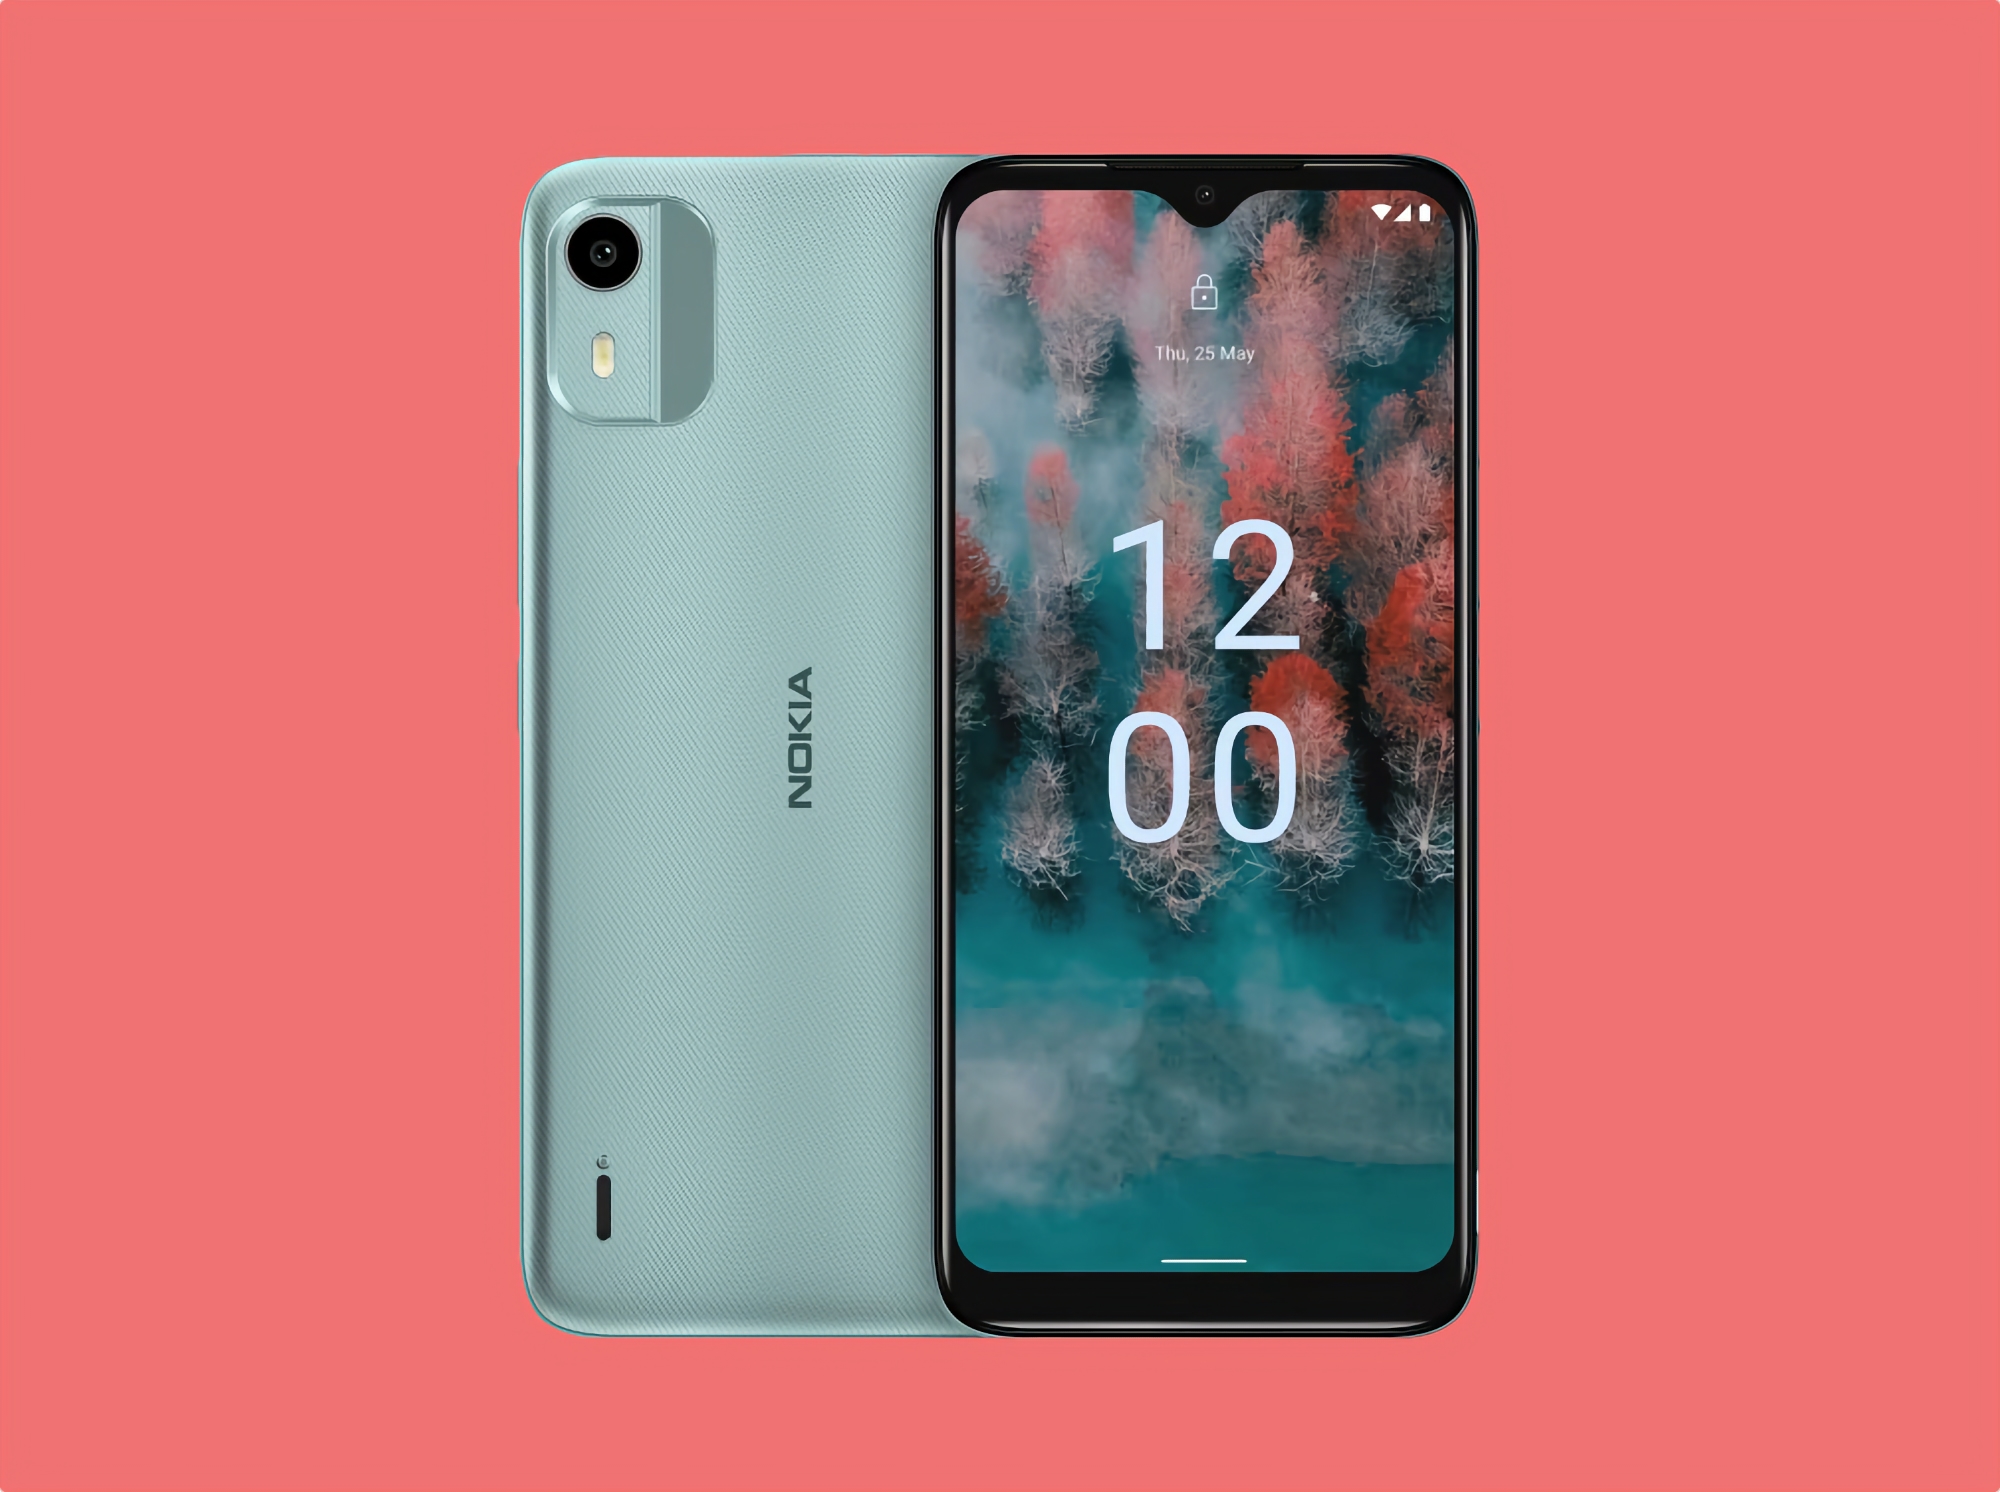 Nokia C12 Pro: budget smartphone with 4000mAh removable battery and Android 12 Go Edition on board